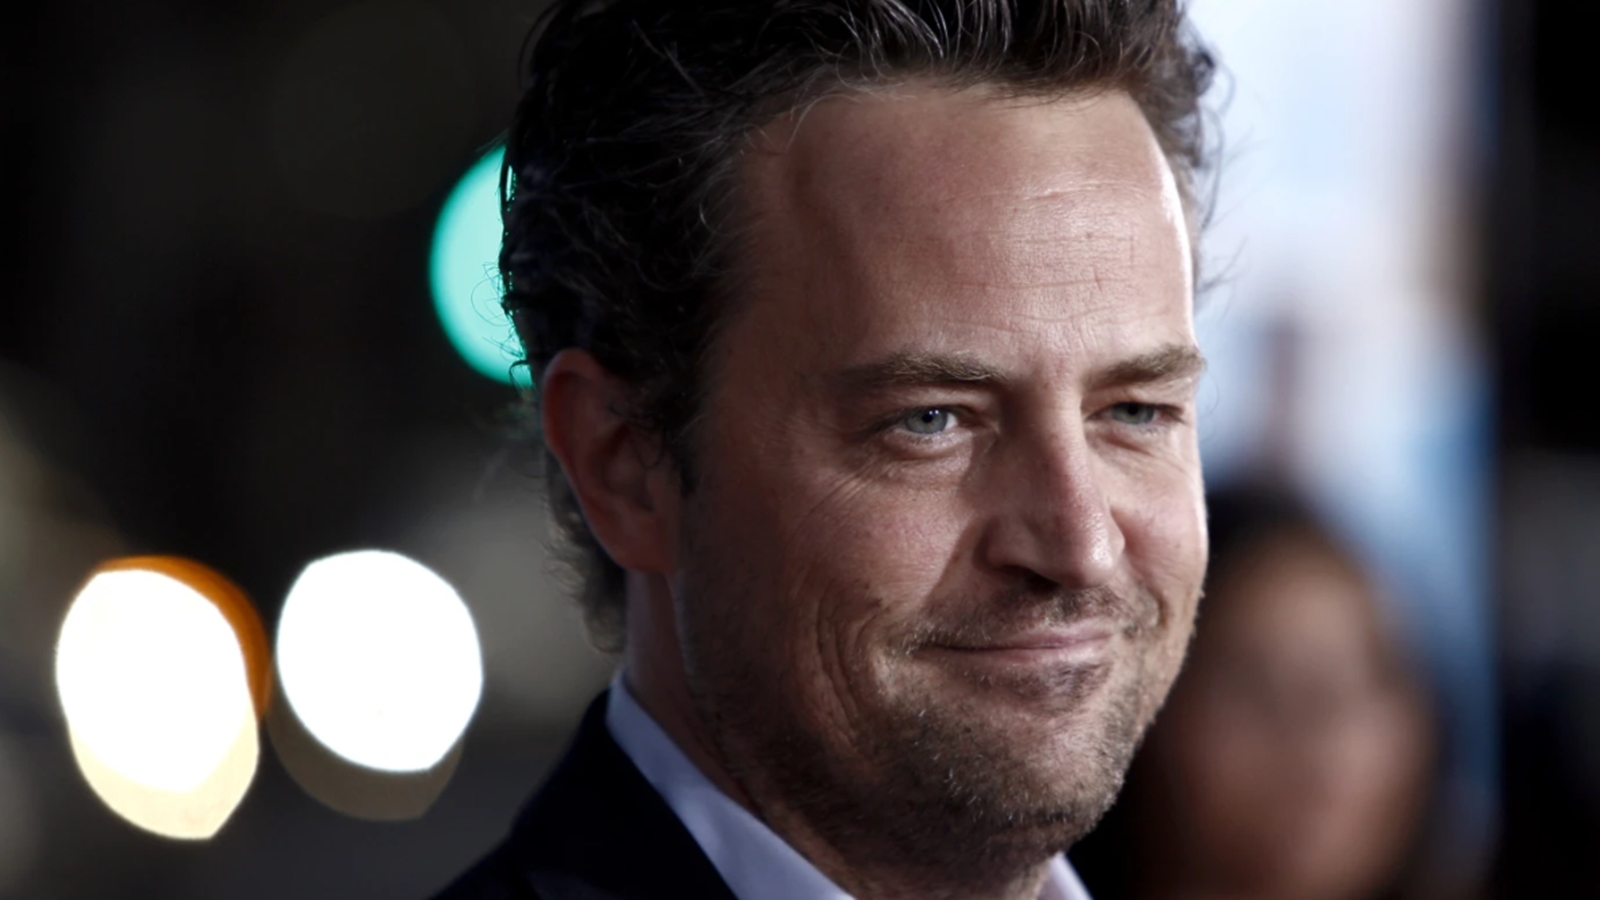 Matthew Perry's final Instagram post was the actor in a hot tub. See here